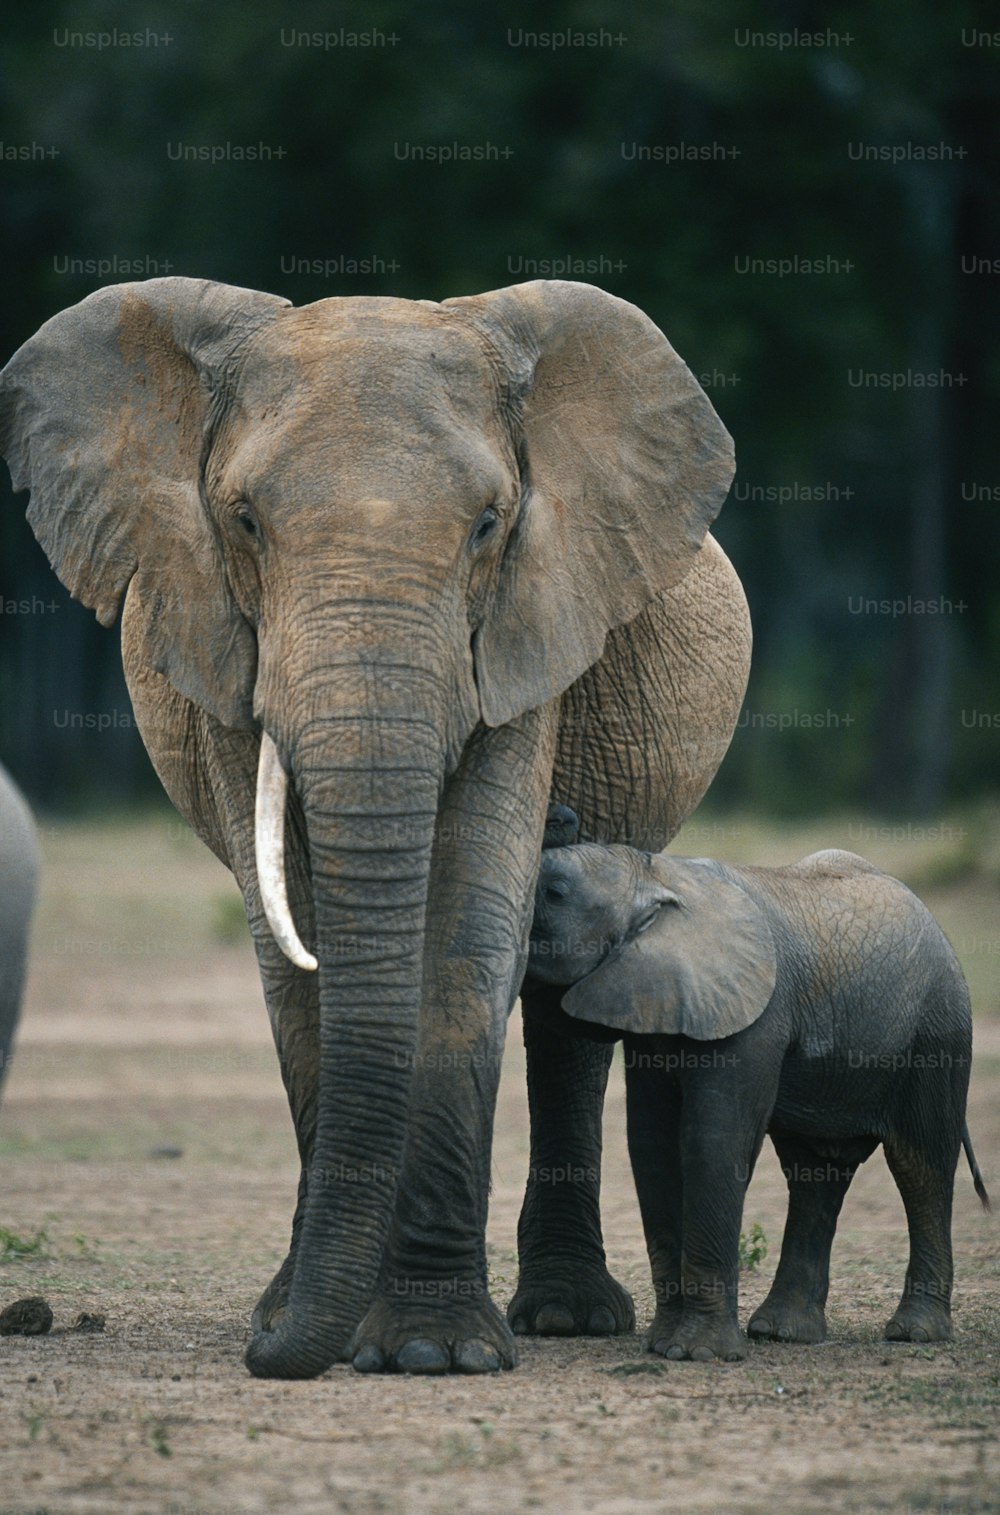 a large elephant standing next to a baby elephant